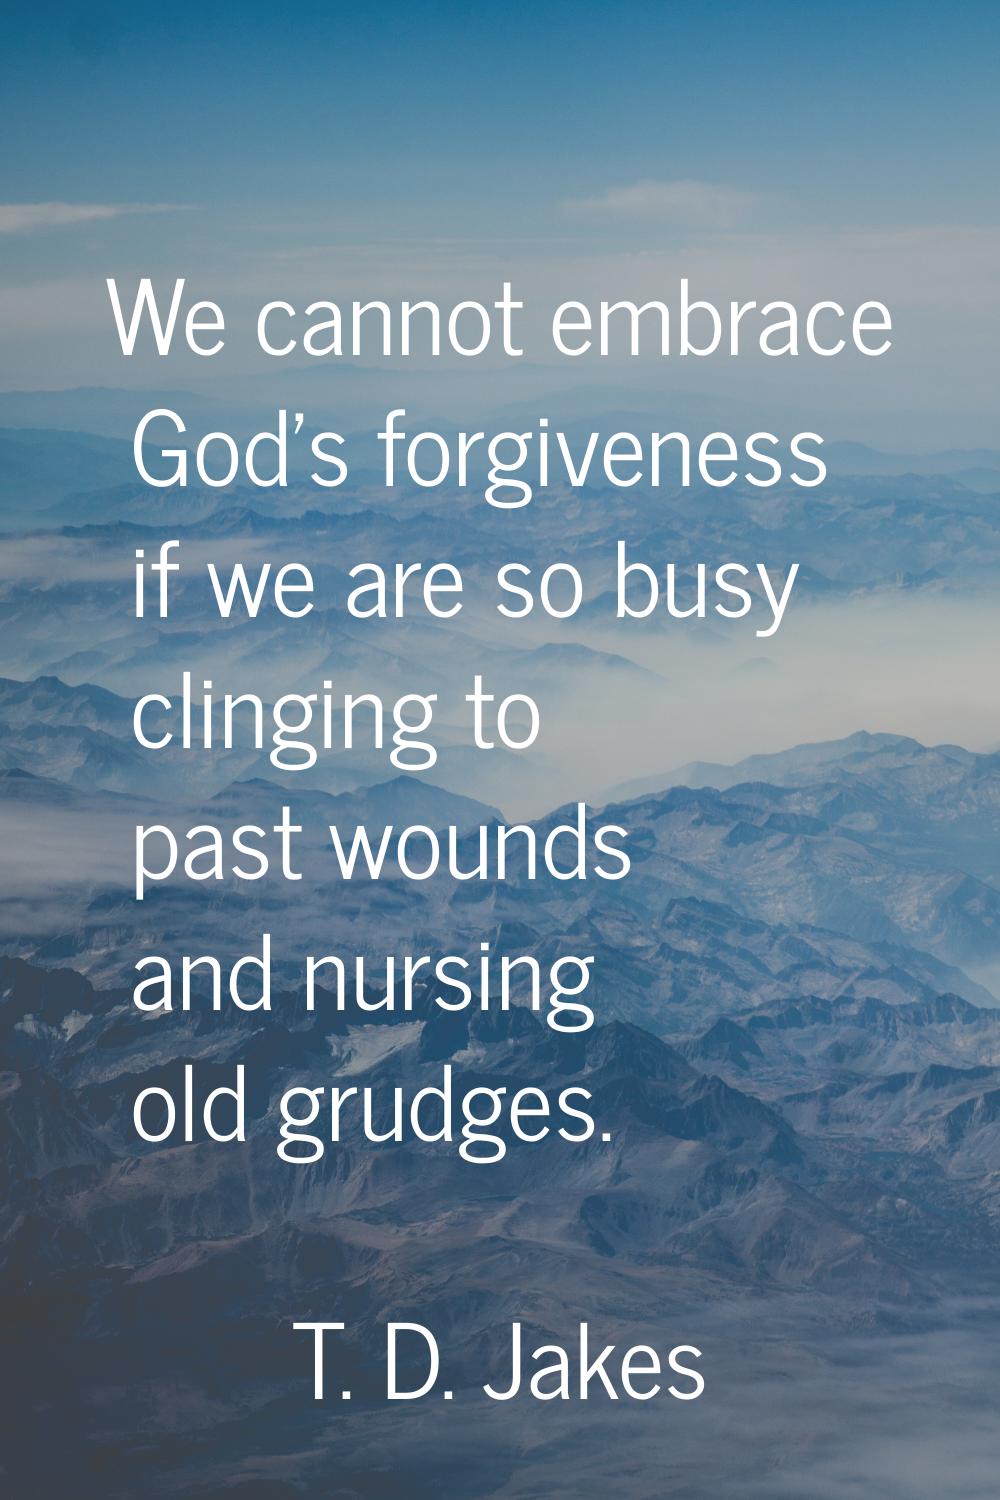 We cannot embrace God's forgiveness if we are so busy clinging to past wounds and nursing old grudg